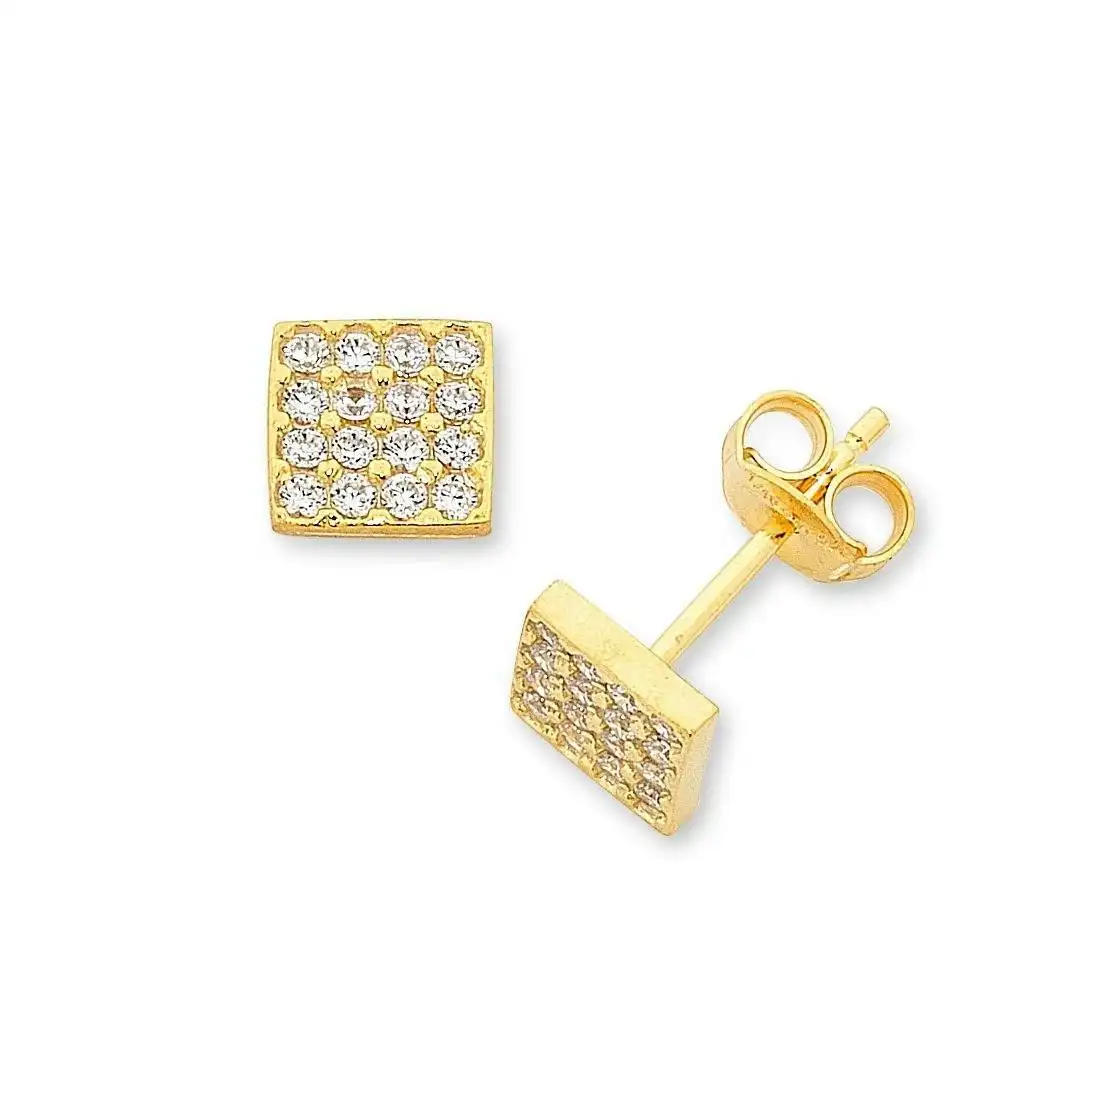 9ct Yellow Gold Silver Infused 7mm Cubic Zirconia Stud Earrings